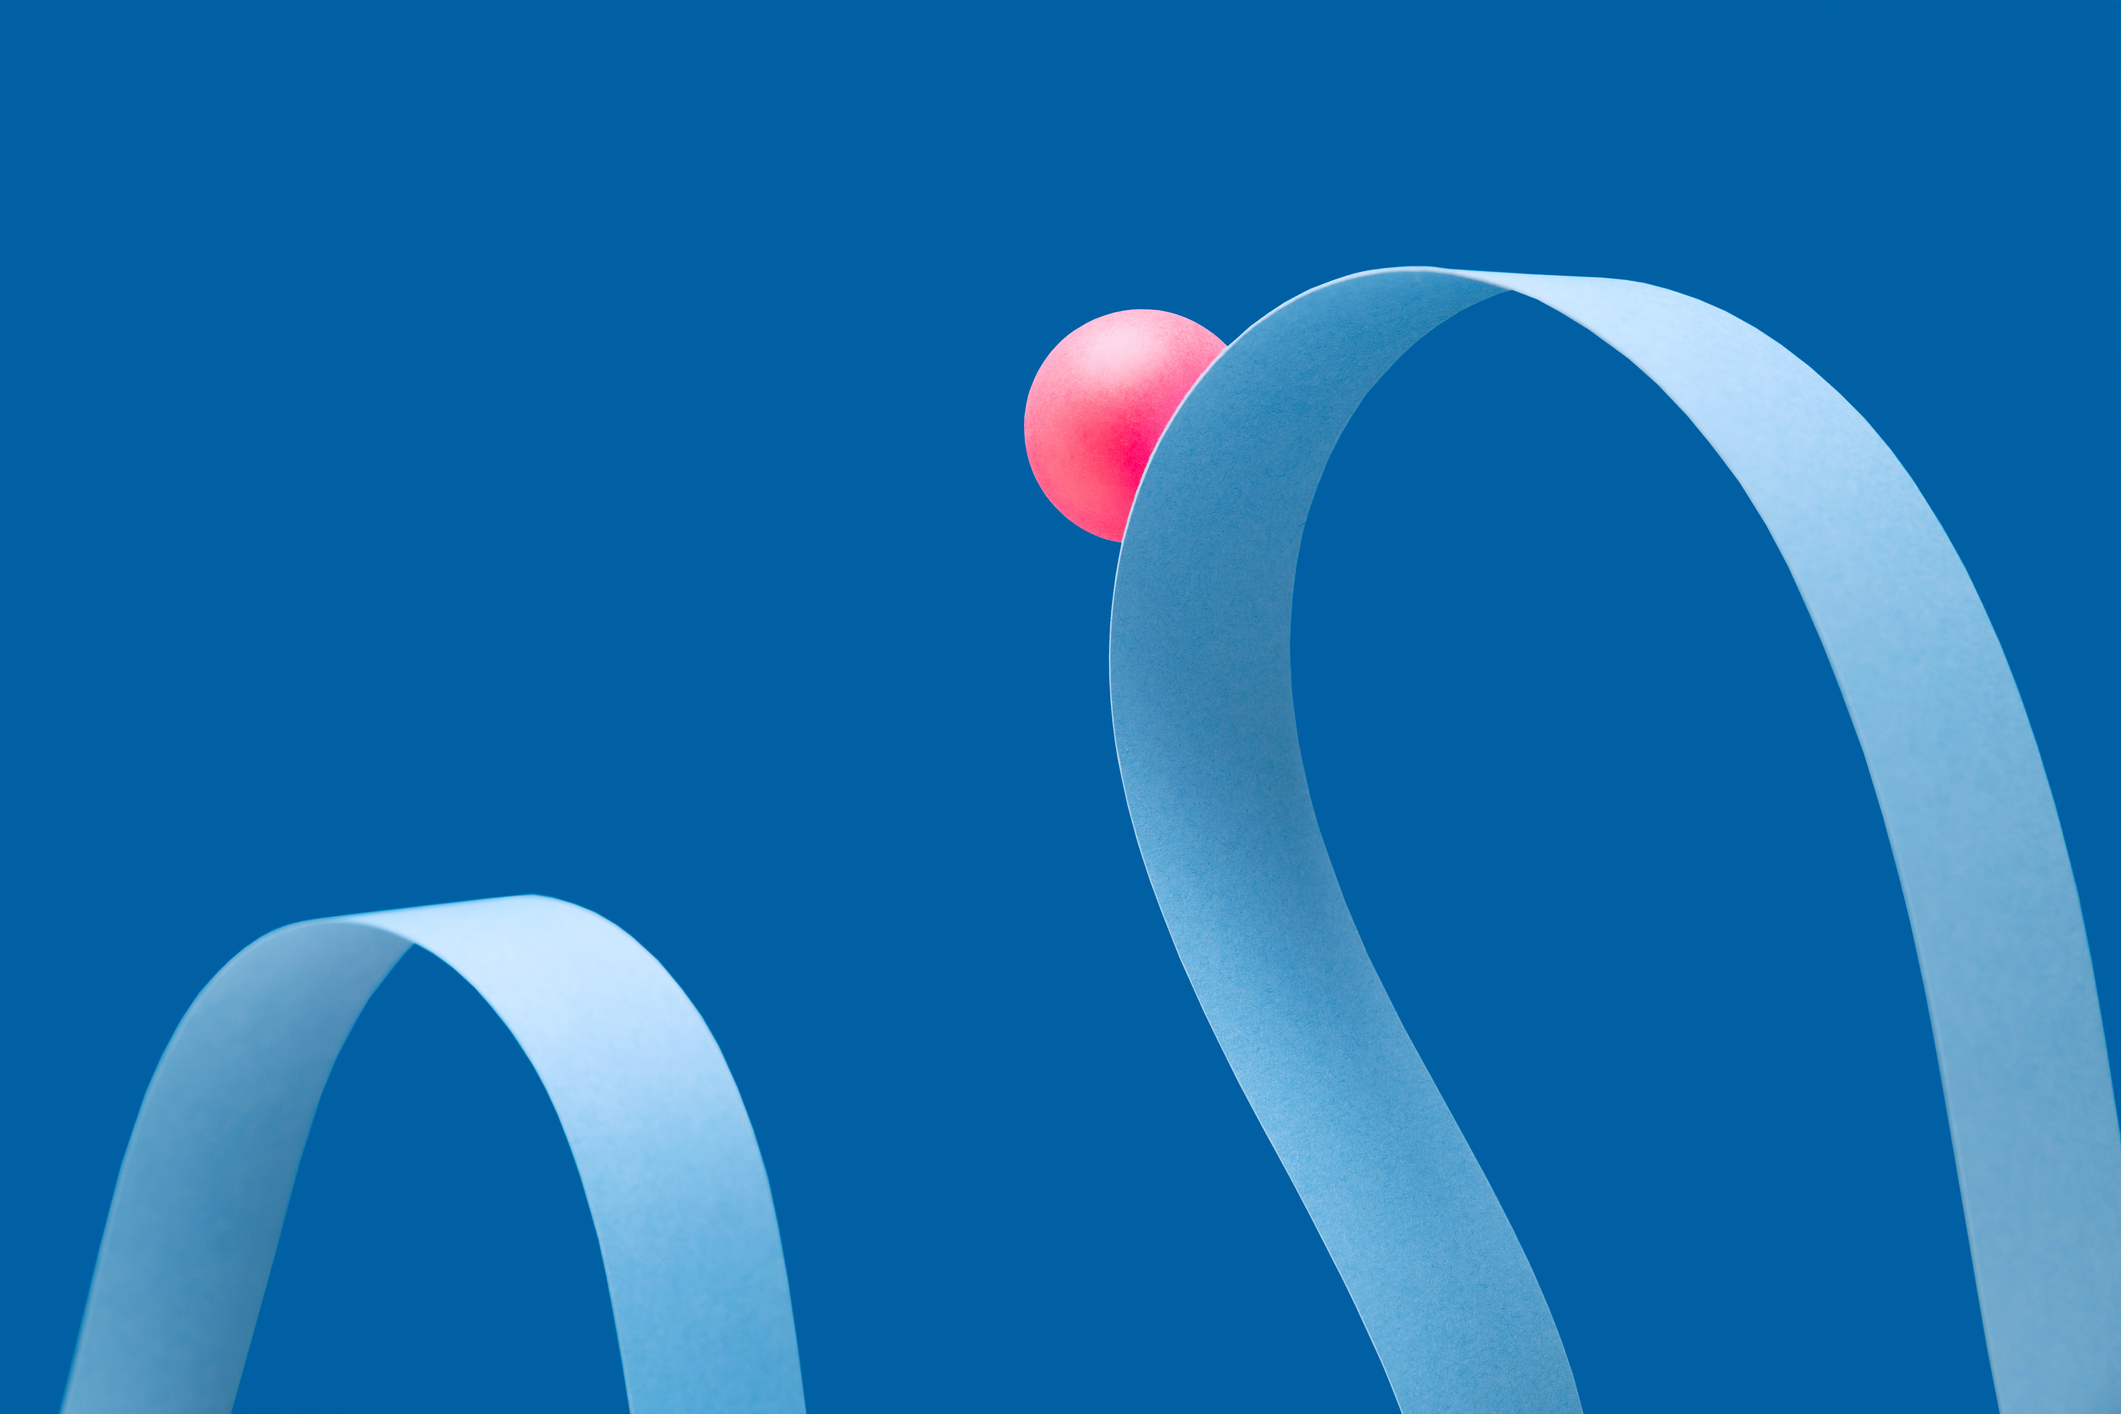 Red ball on curved light blue paper, blue background